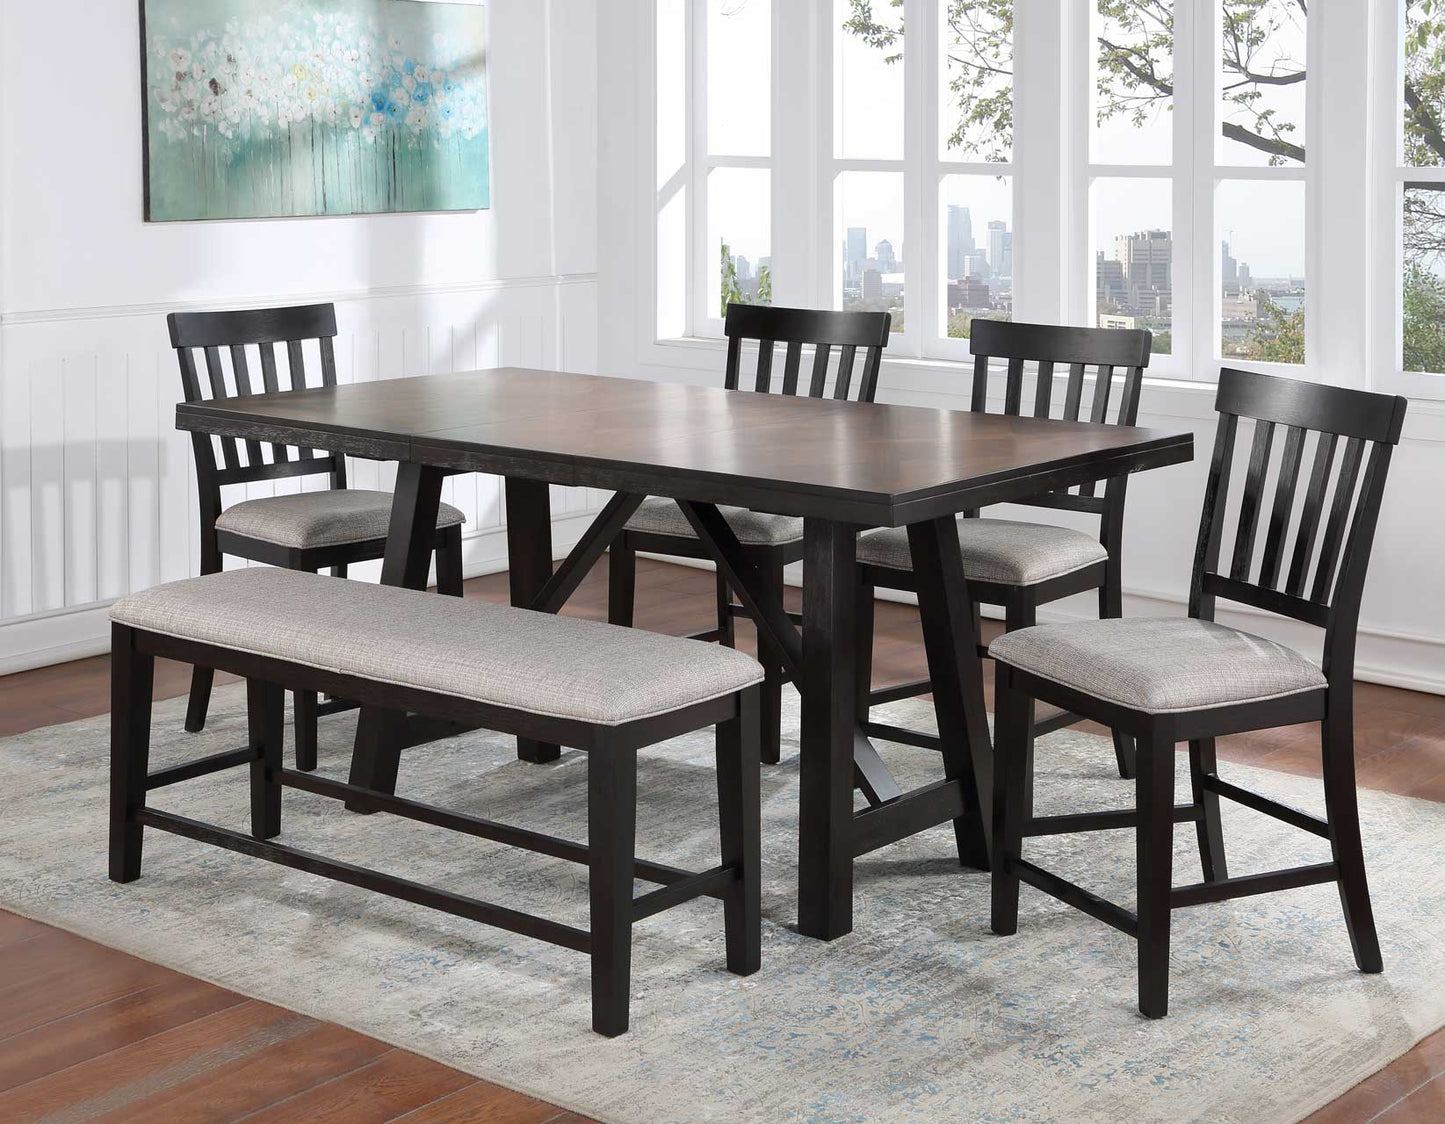 Halle 5-Piece Counter Dining Set
(Counter Table & 4 Counter Chairs)